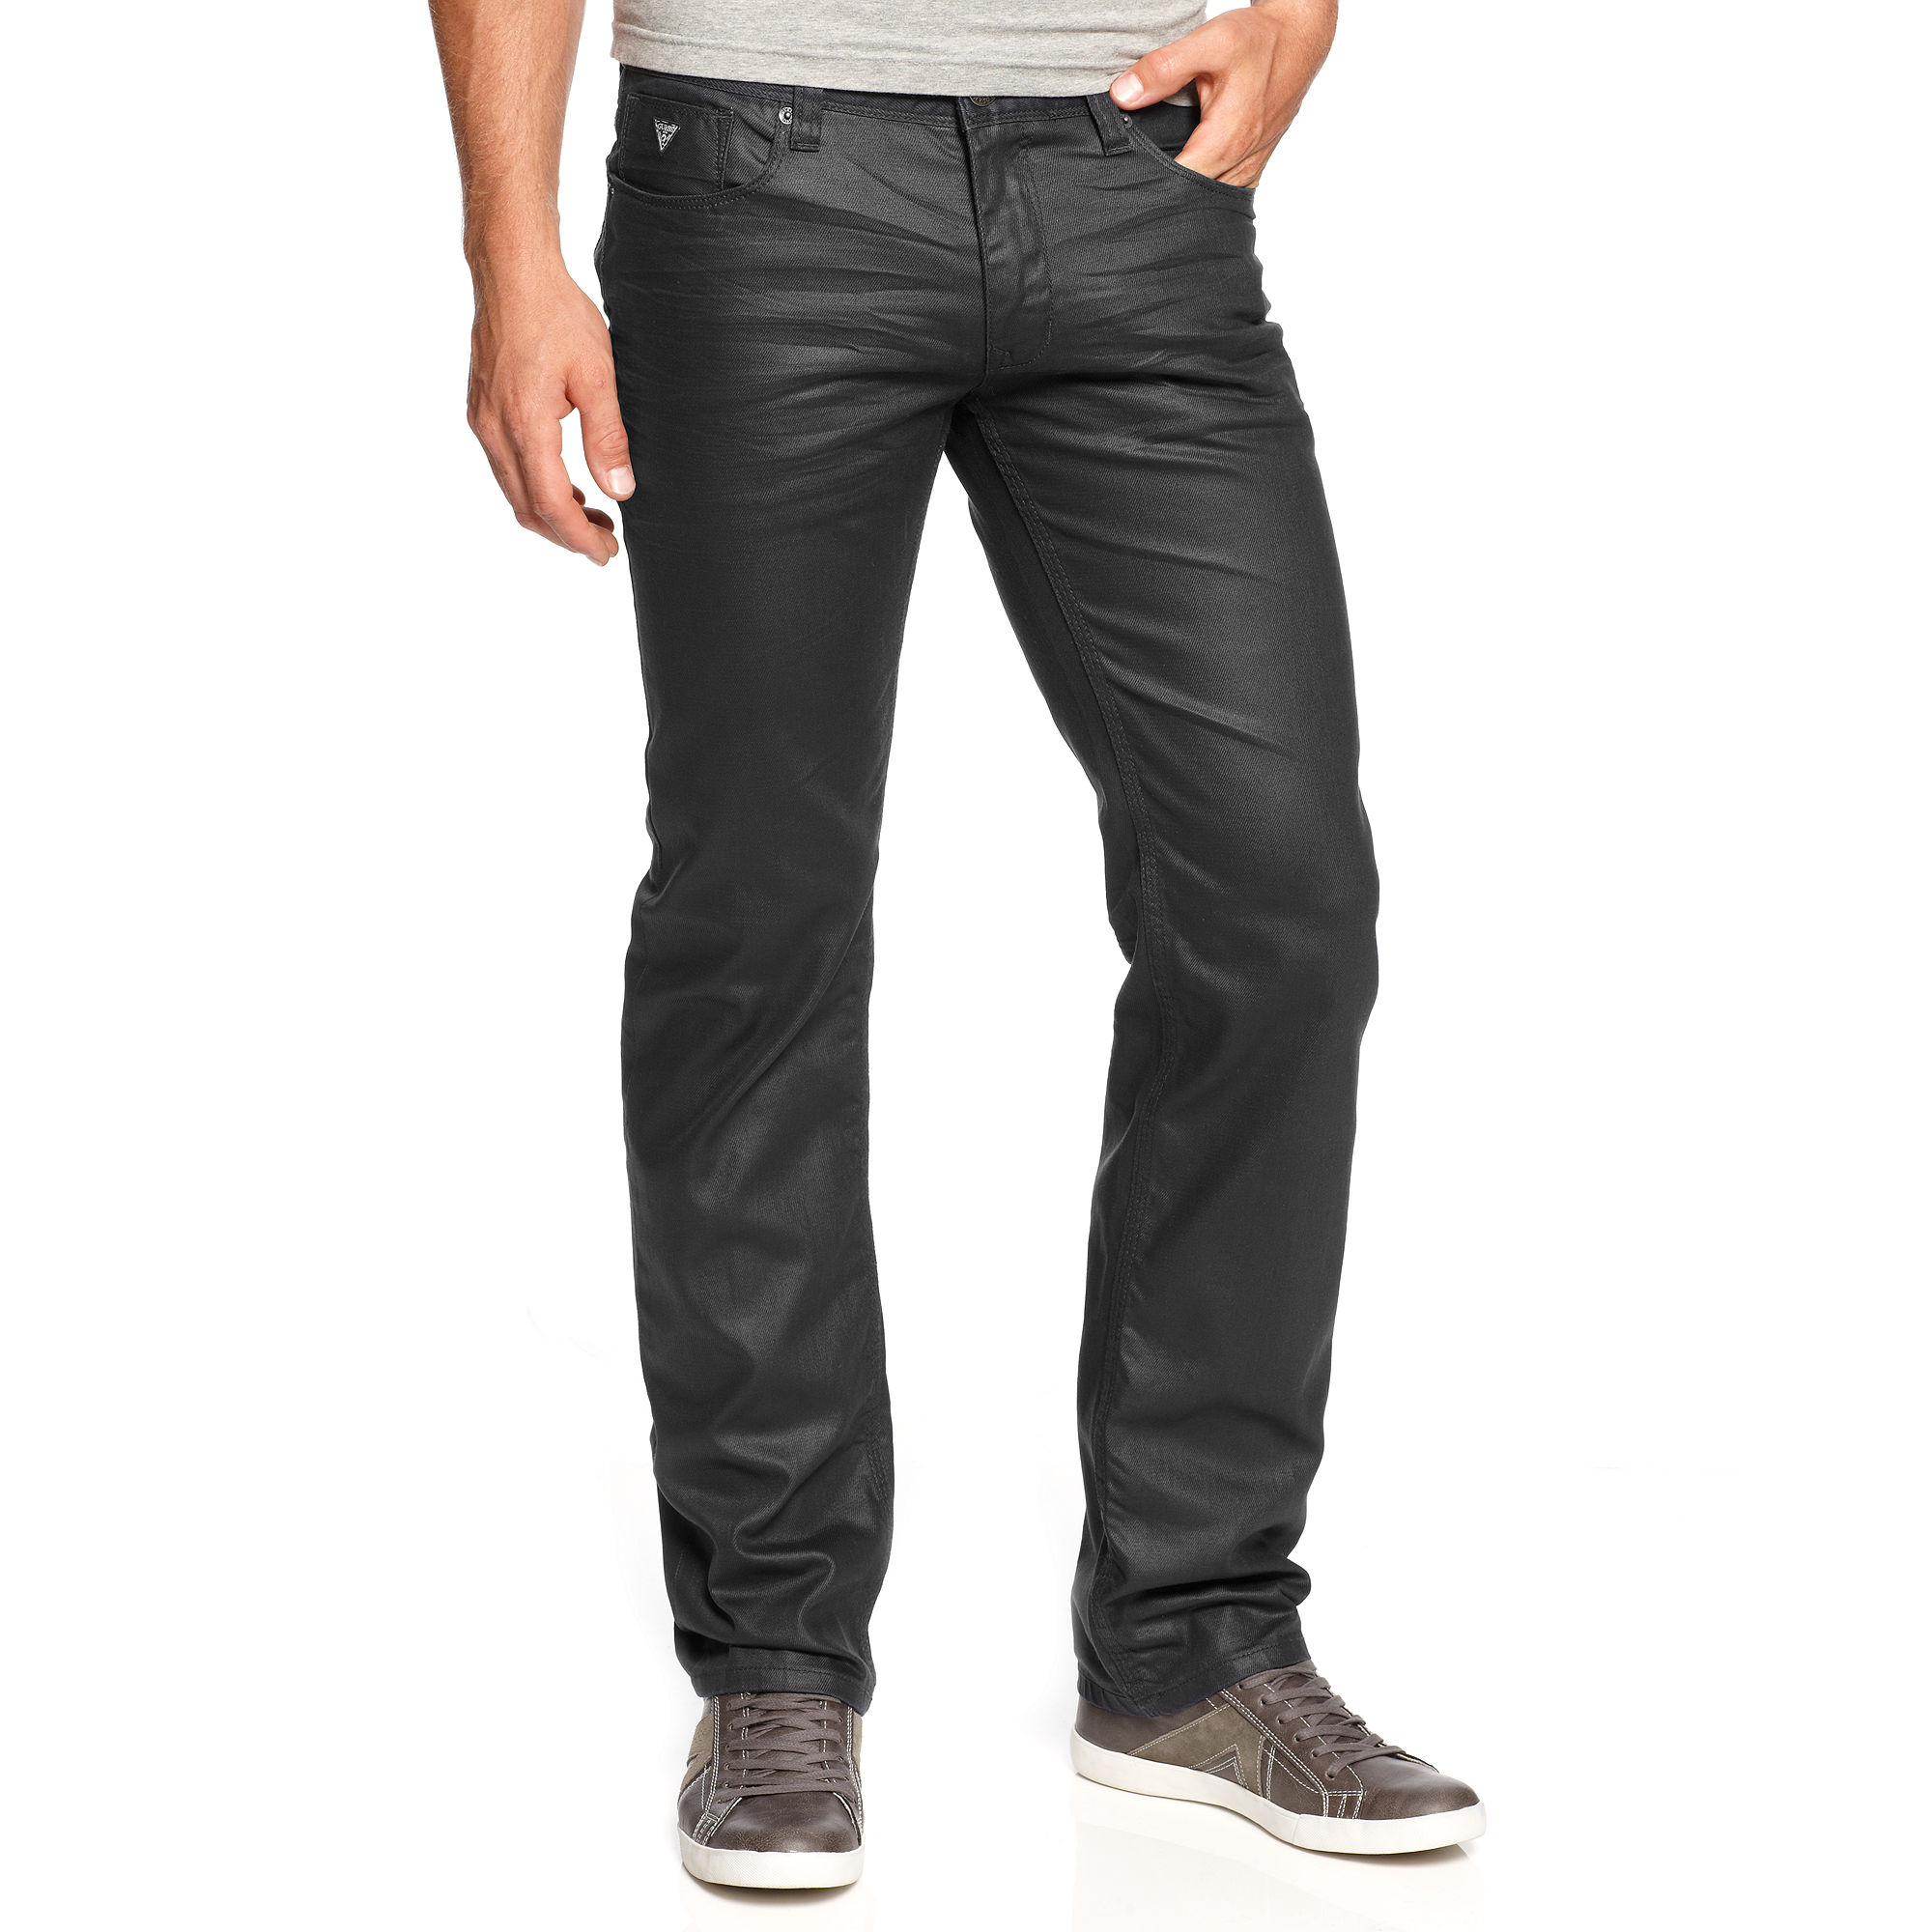 Lyst - Guess Lincoln Coated Darkwash Denim Jeans in Blue for Men